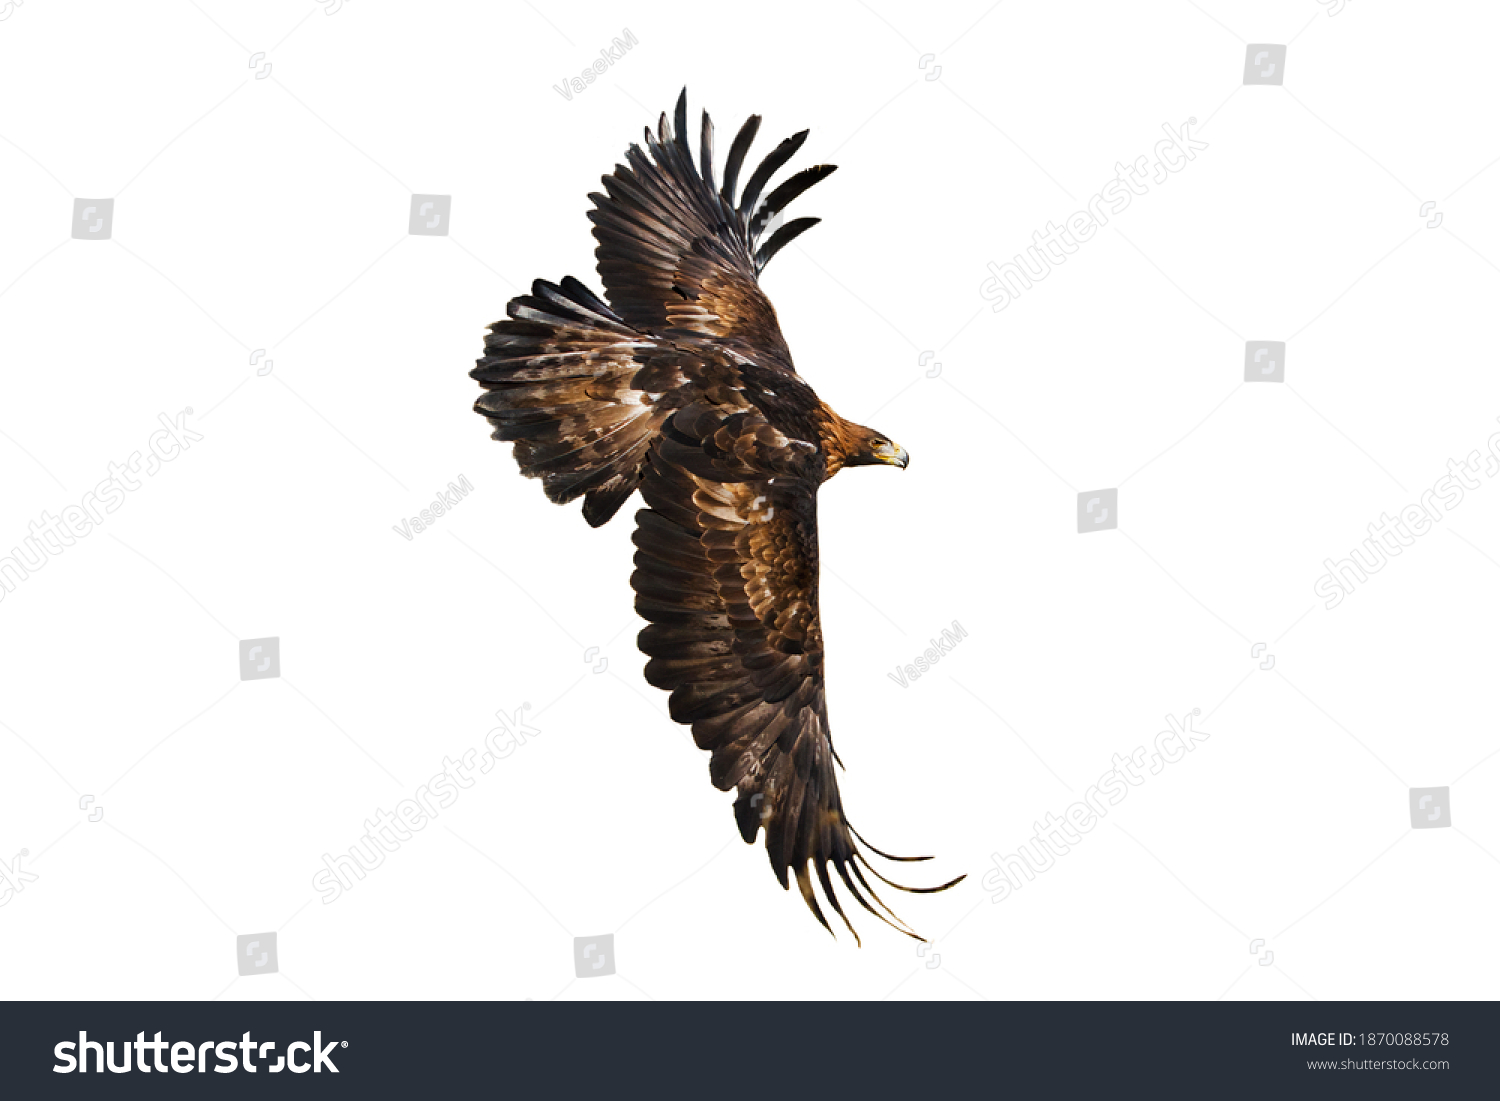 Eagle in flight. Golden eagle, Aquila chrysaetos, flying with widely spread wings isolated on white background. Majestic bird. Hunting eagle in mountains. Habitat Europe, Asia, North America. #1870088578